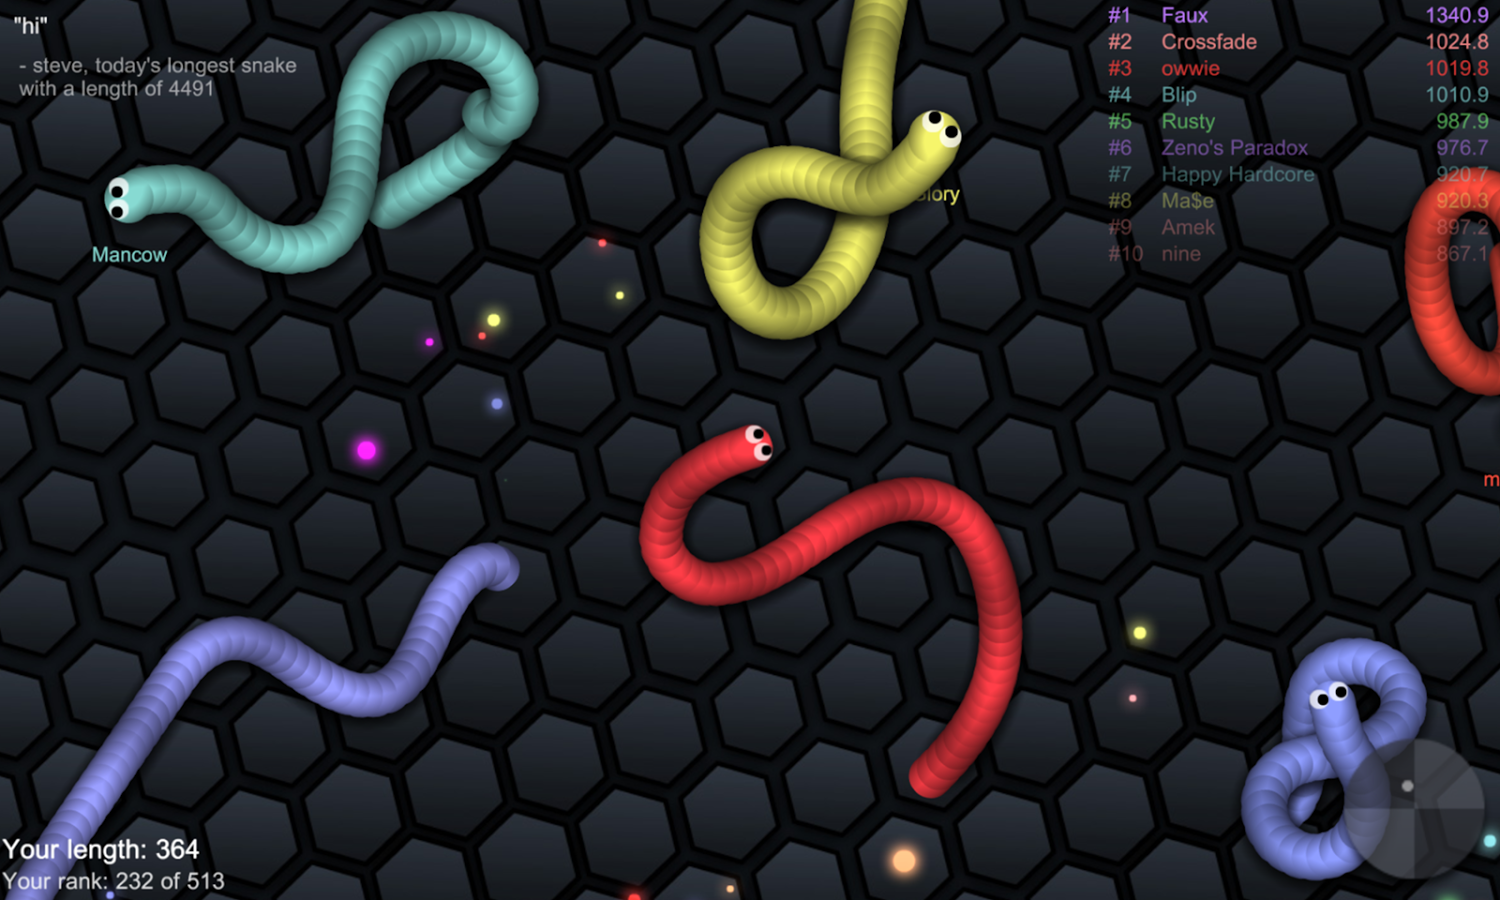 The game that represents the evolution of the snake